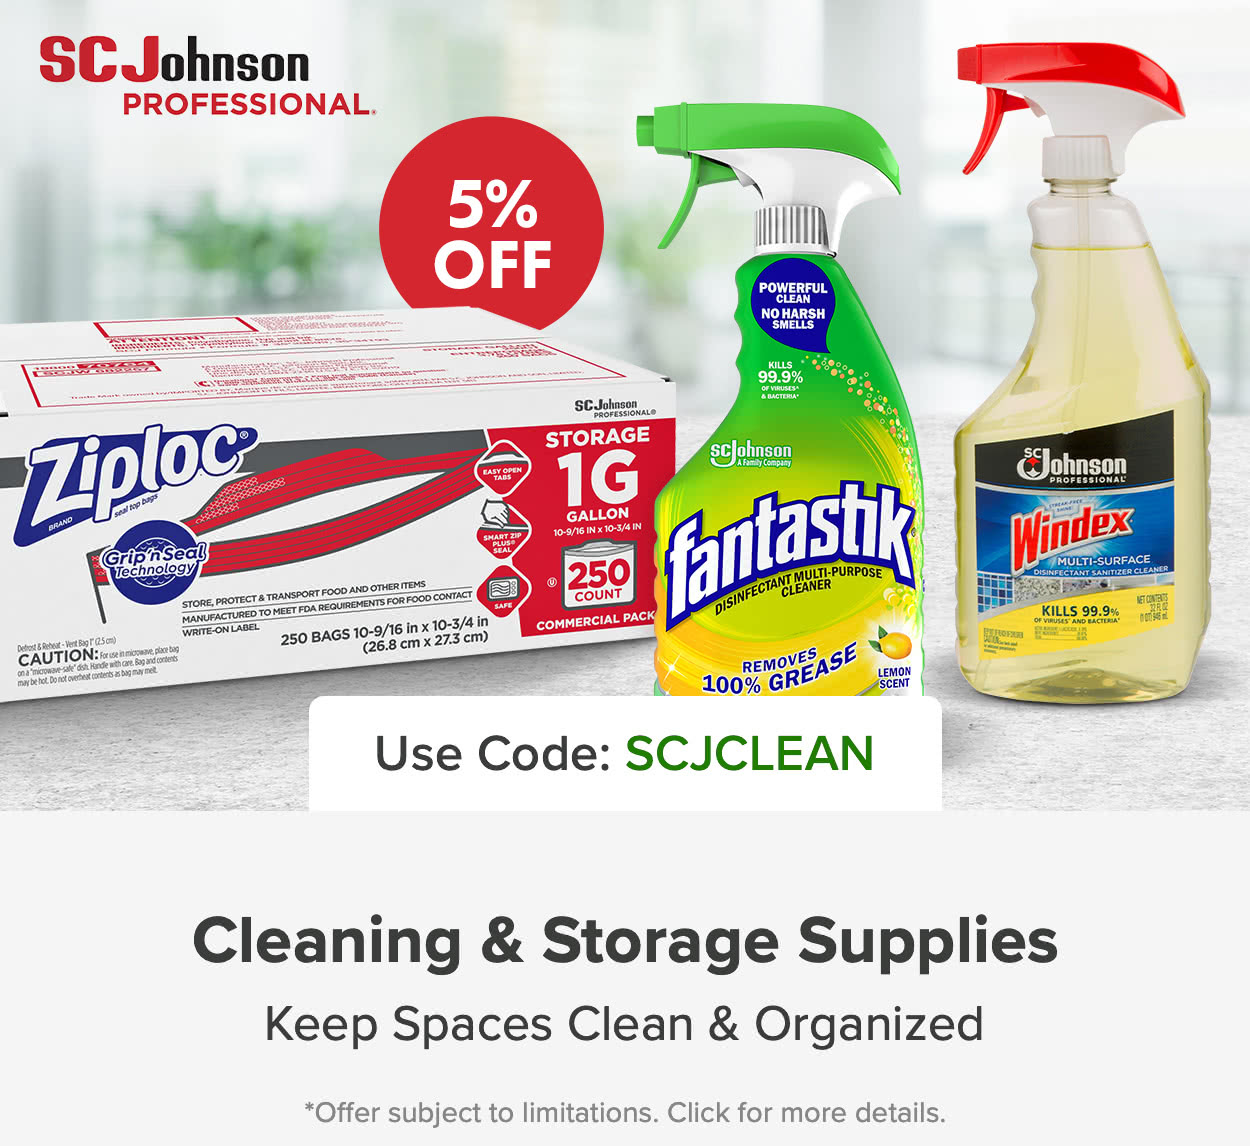 Stock up on Disinfectants, Bags, Wipes and More from Ziploc, Windex, and Fantastik